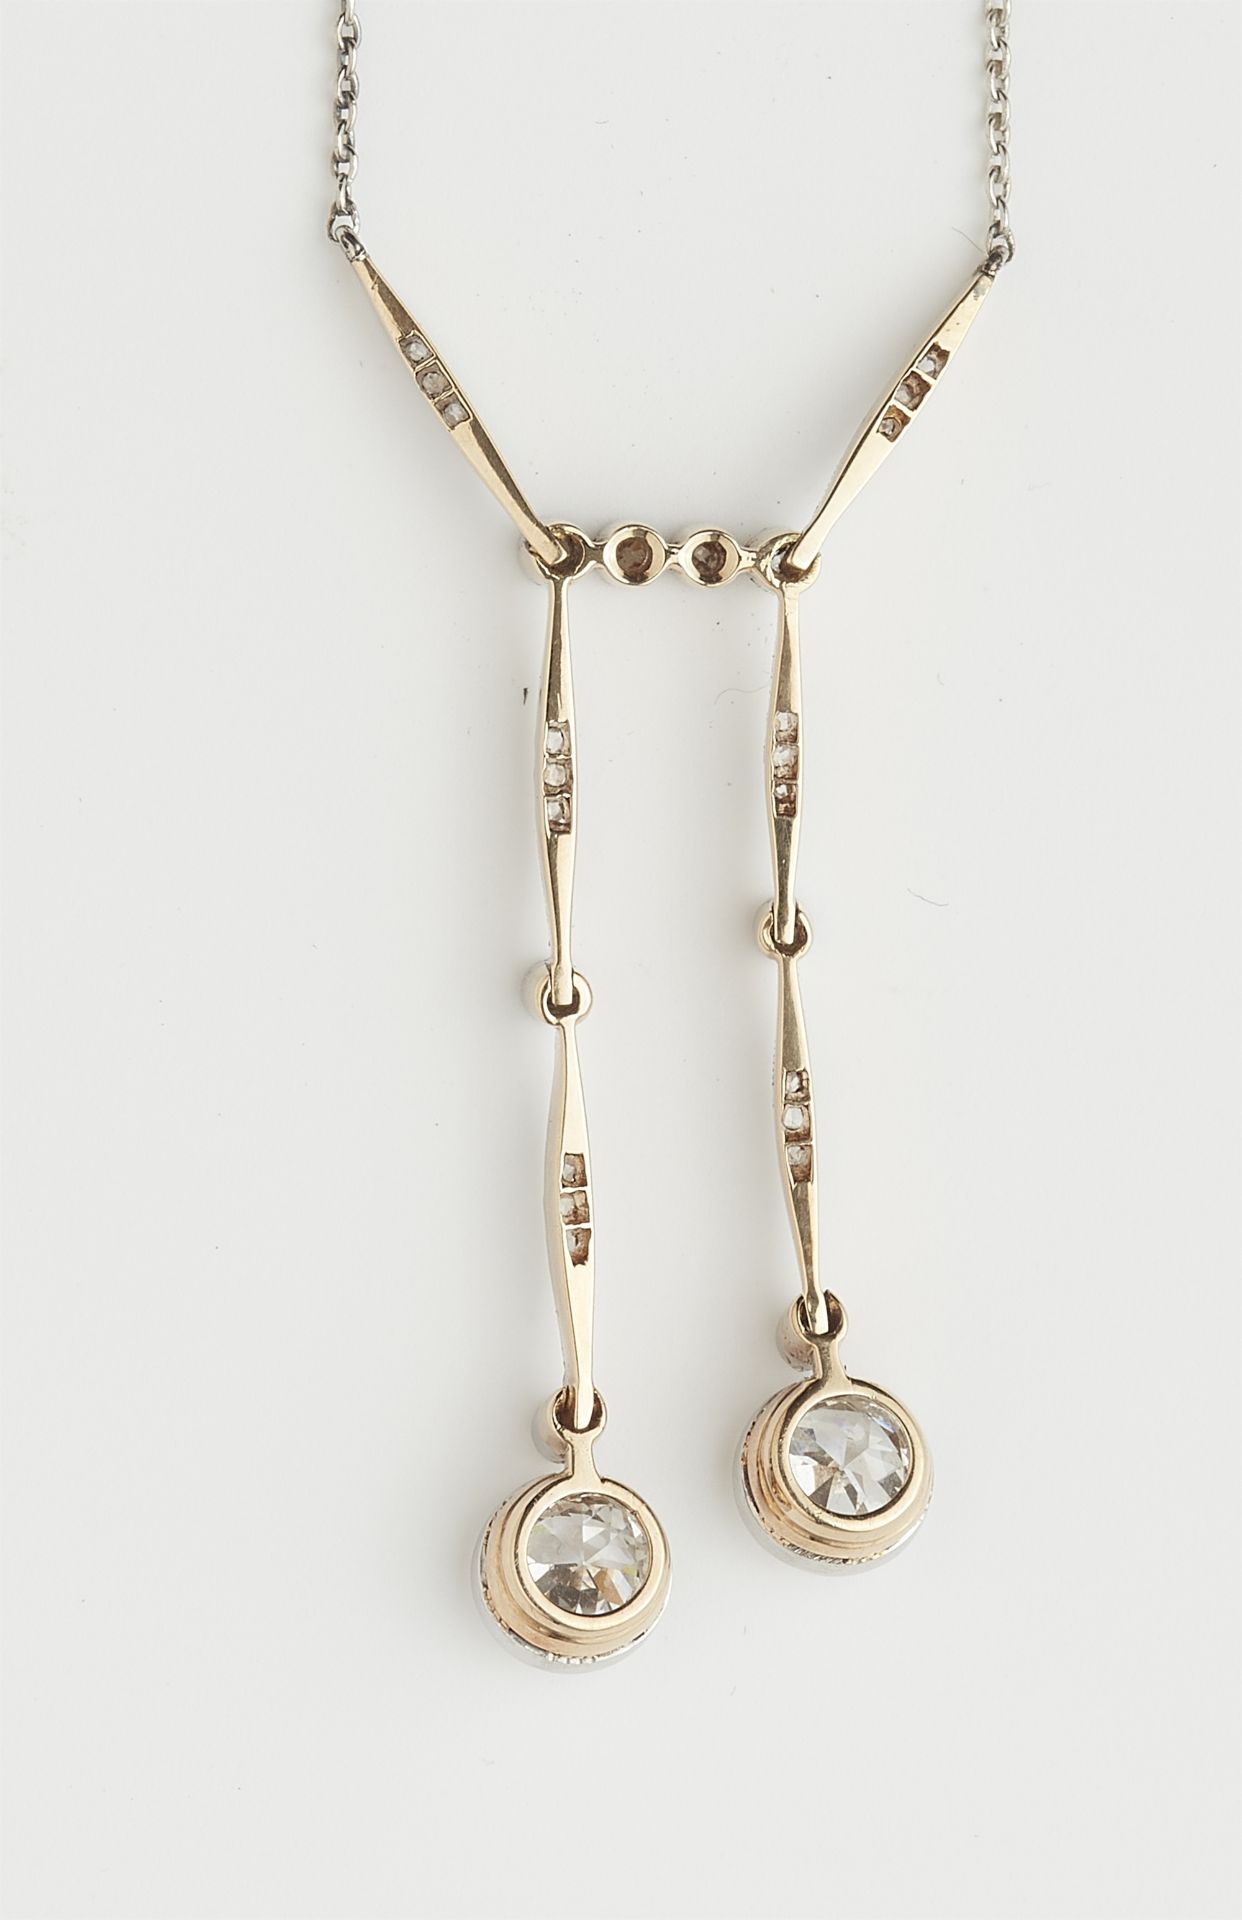 A 14k gold diamond negligé pendant necklace with two transitional-cut diamond solitaires. - Image 3 of 4